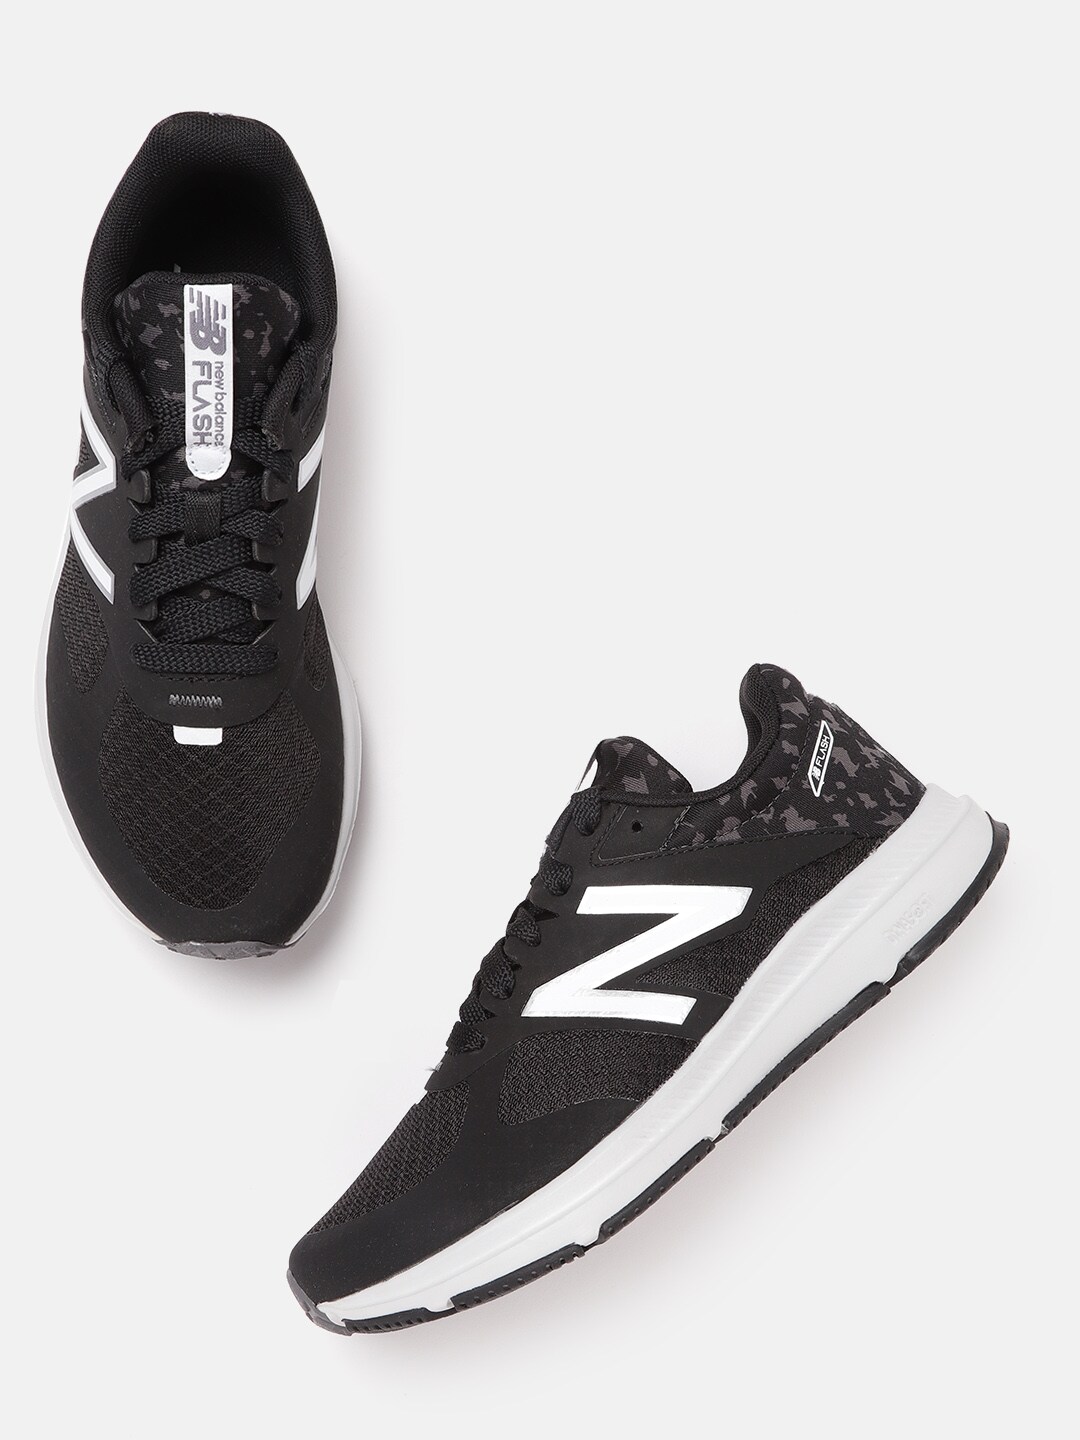 New Balance Women Black & Charcoal Grey Flash Woven Design Running Shoes Price in India